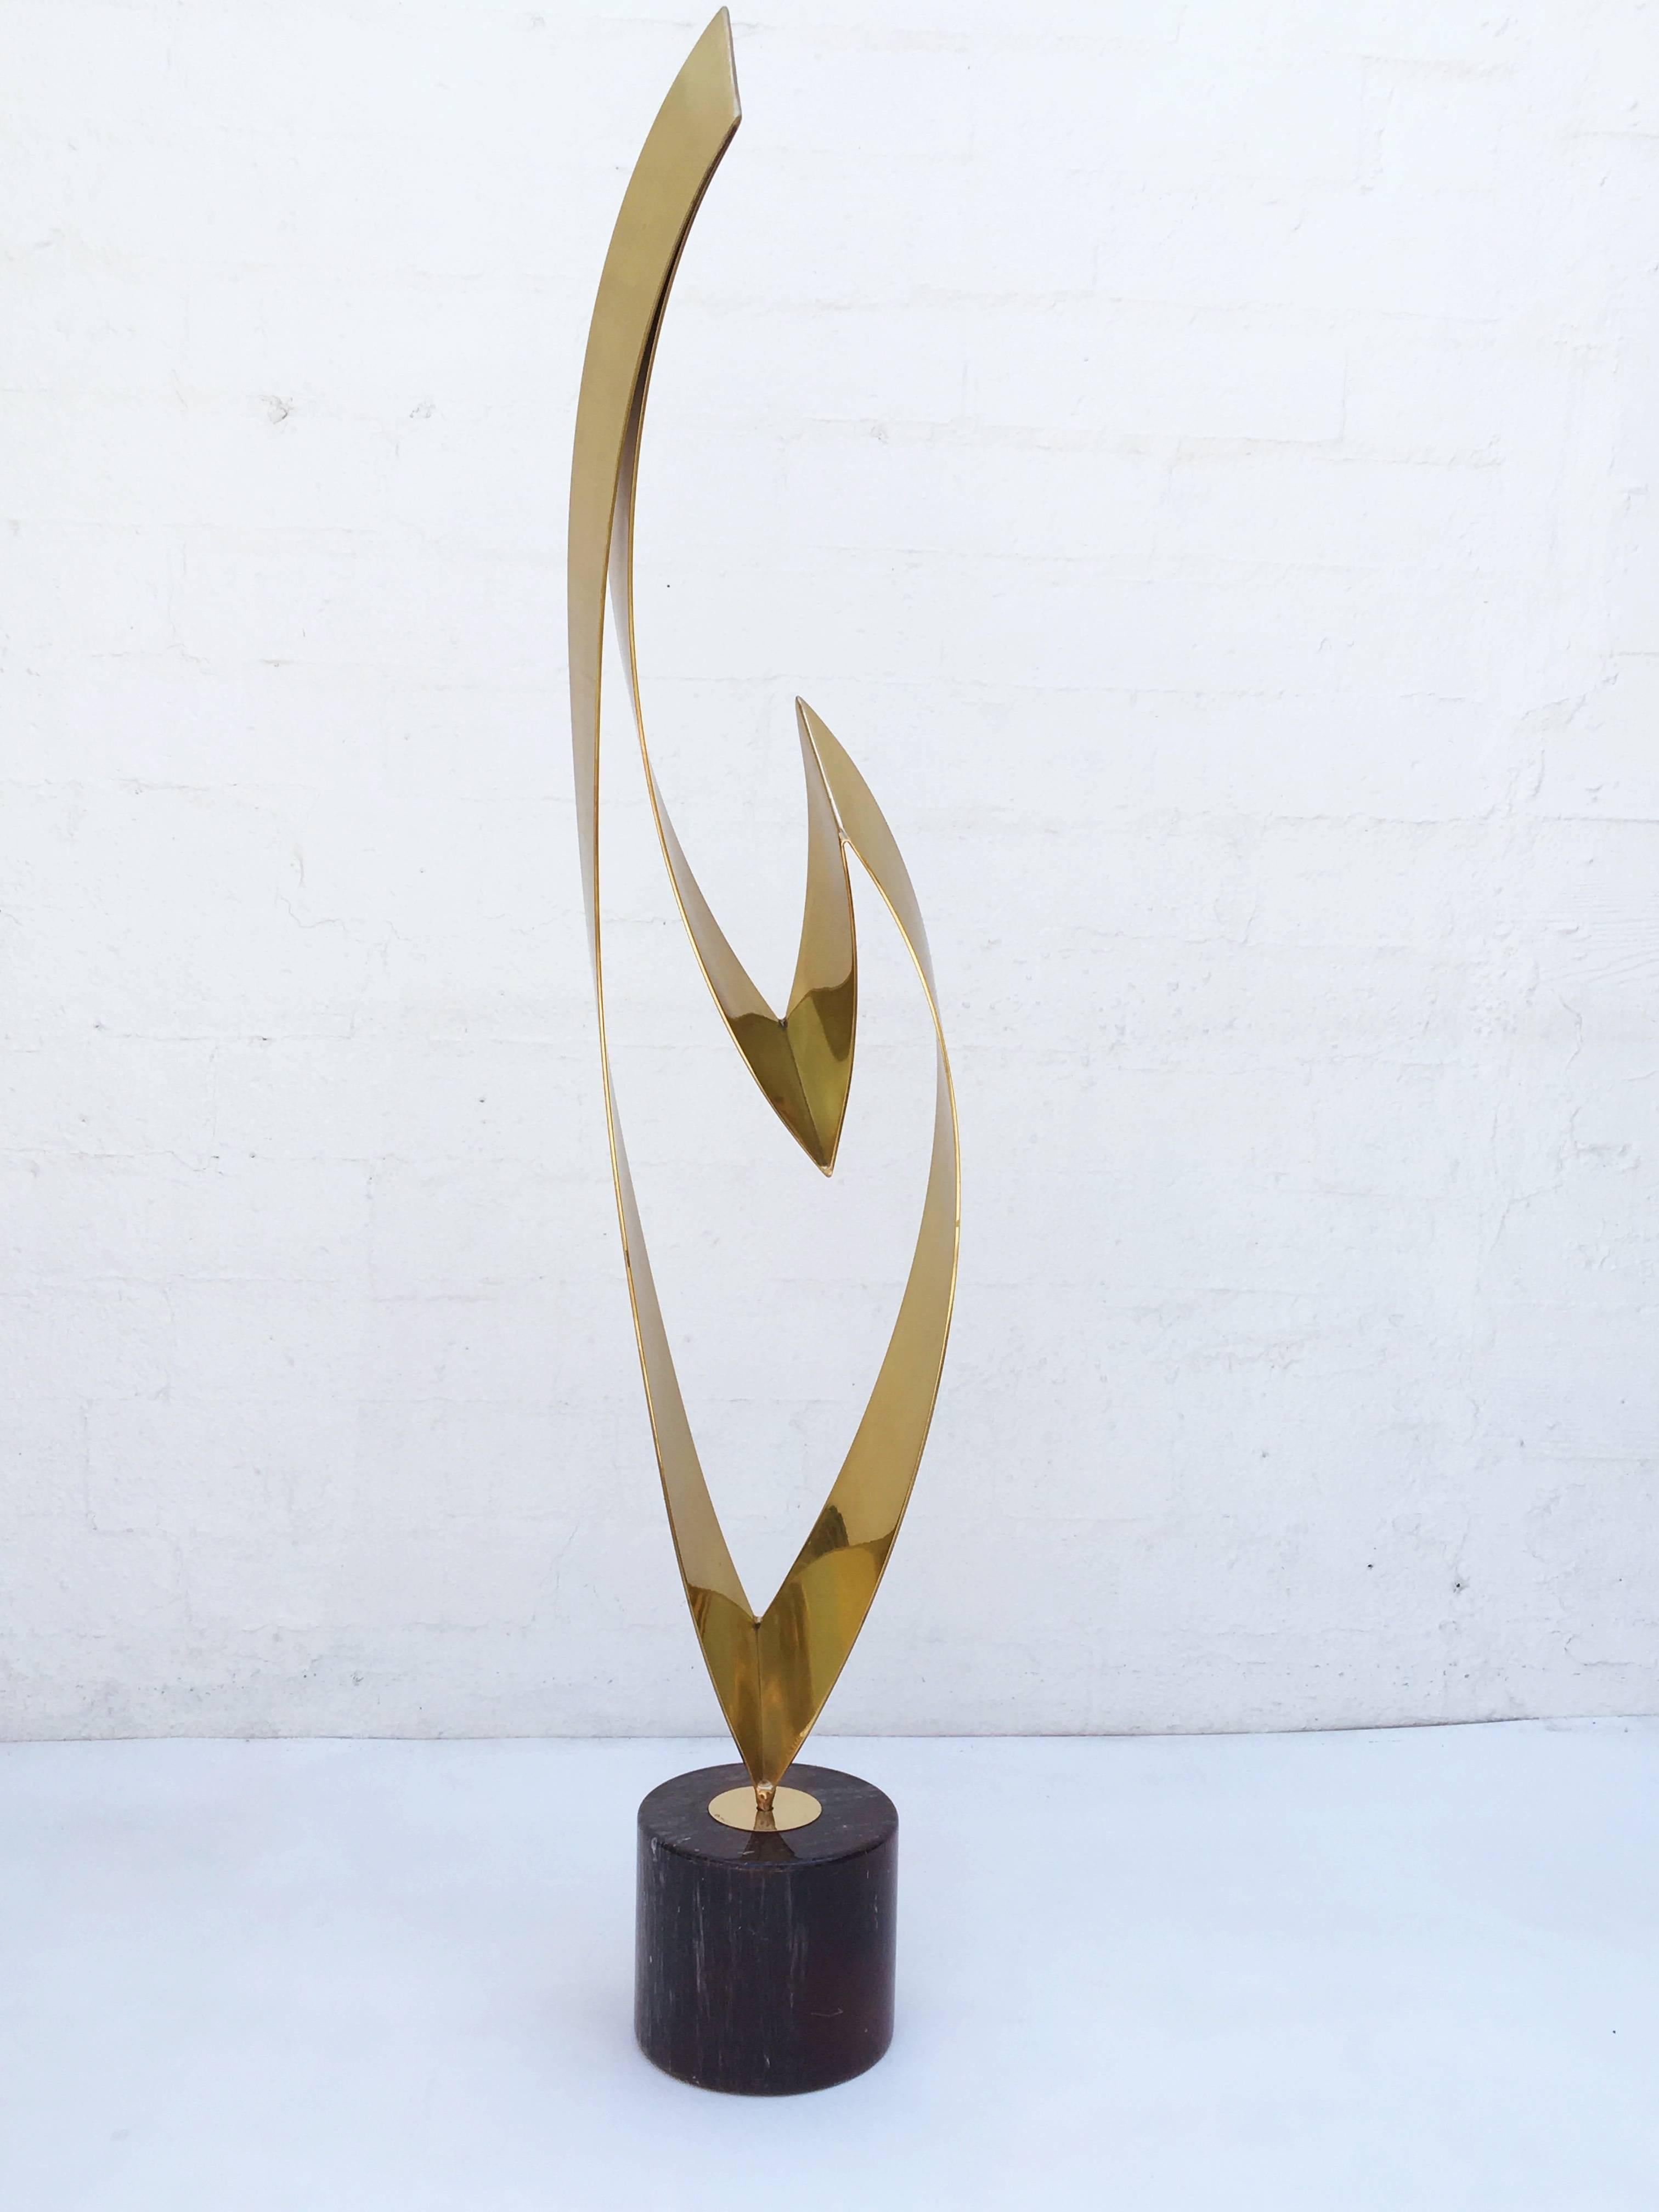 A beautiful polished brass abstract sculpture on a black marble base designed by Curtis Jere' in the 1970s. The sculpture is signed on the base.

The base is 7